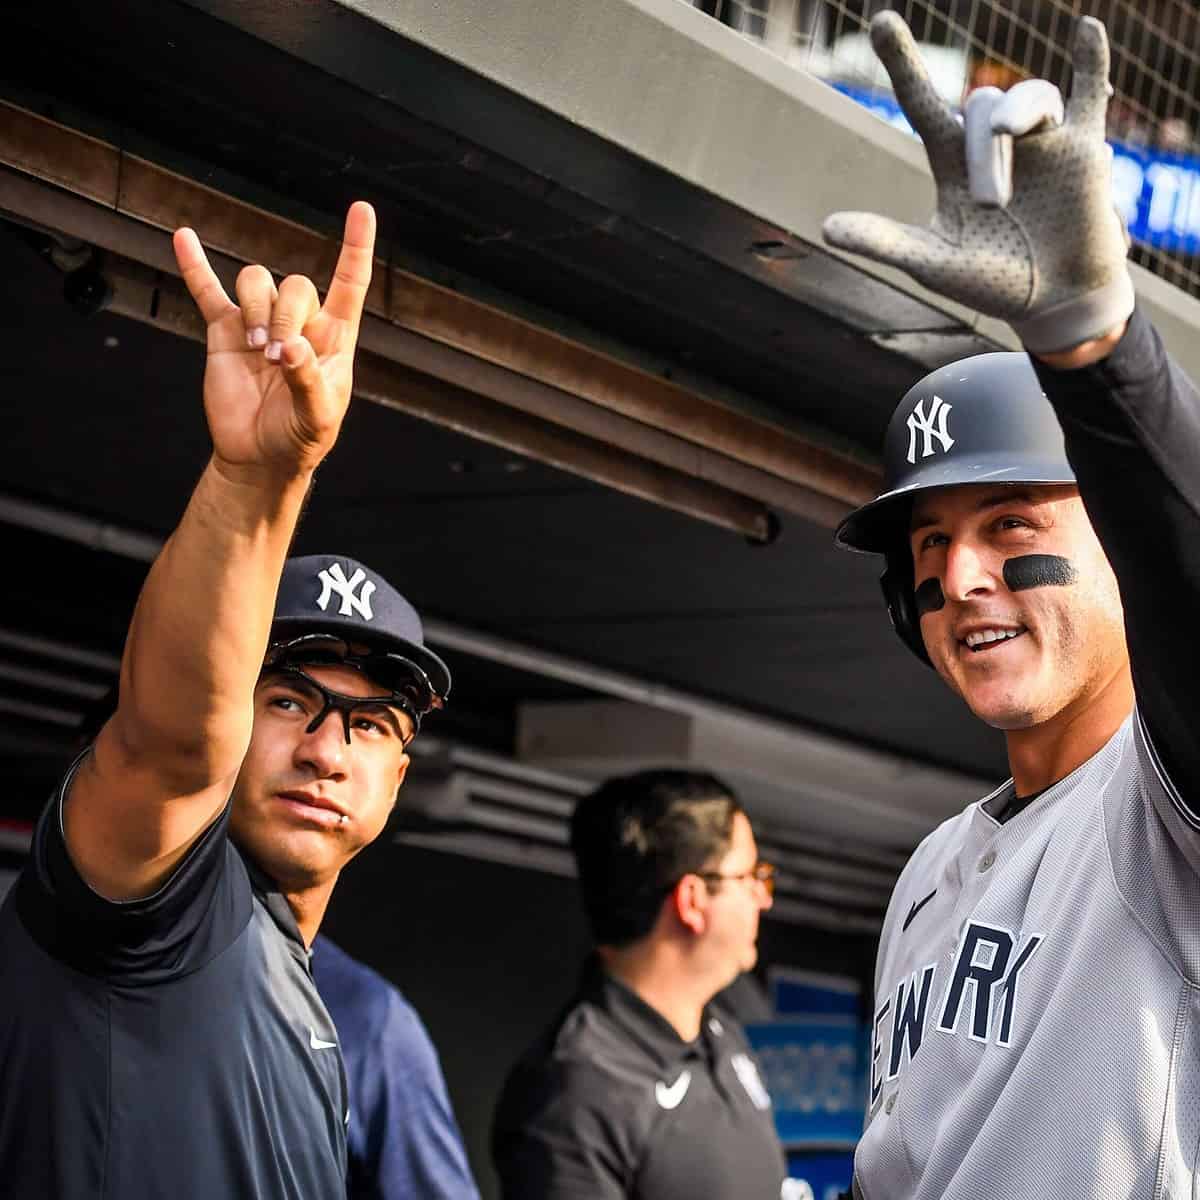 Gleyber Torres' Playful Dig At Anthony Rizzo Amuses Fans